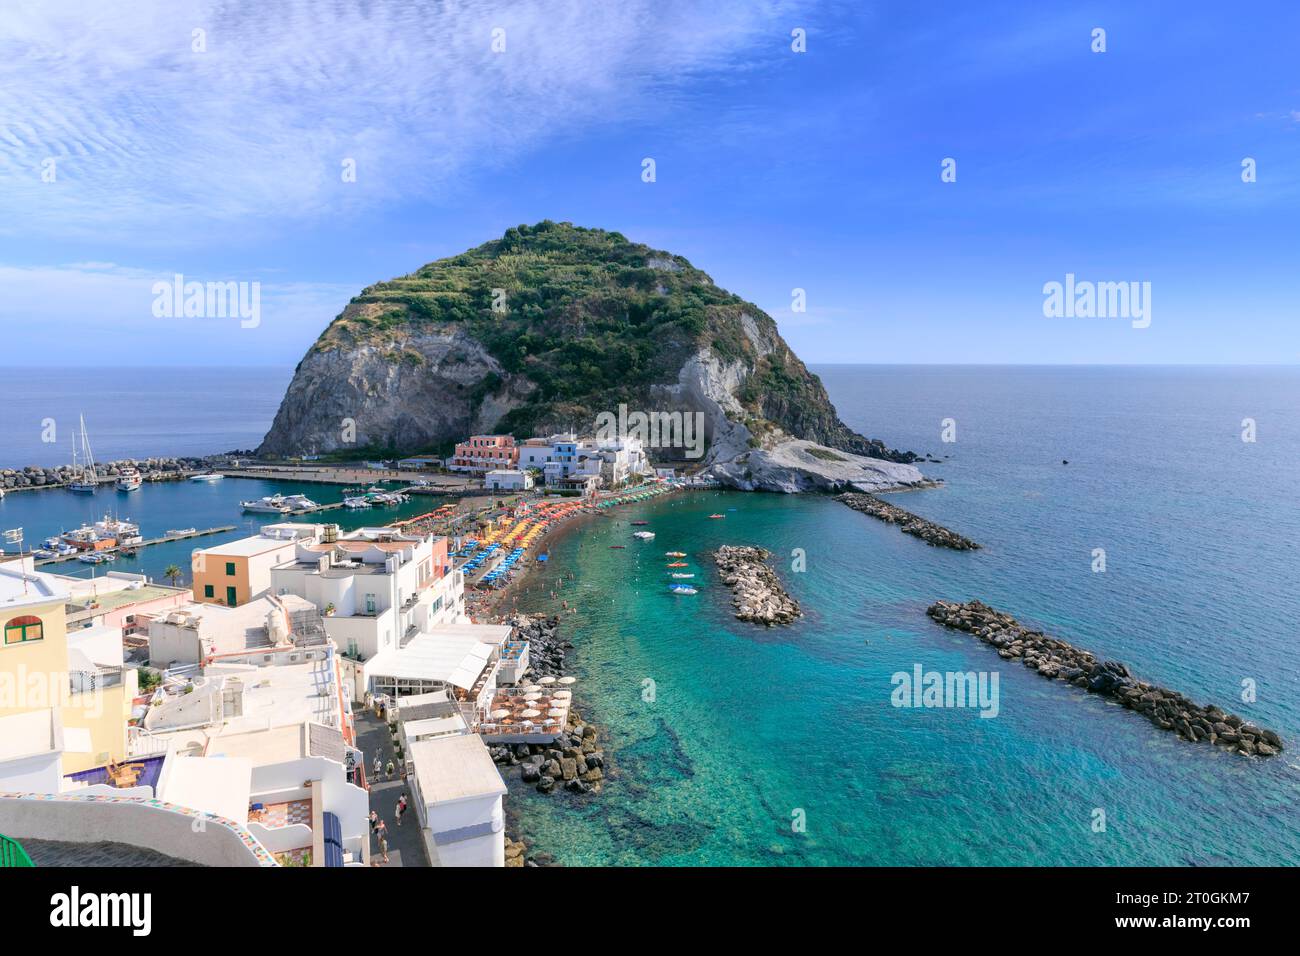 View of Sant’Angelo, a charming fishing village and popular tourist destination on island of Ischia in southern Italy. Stock Photo